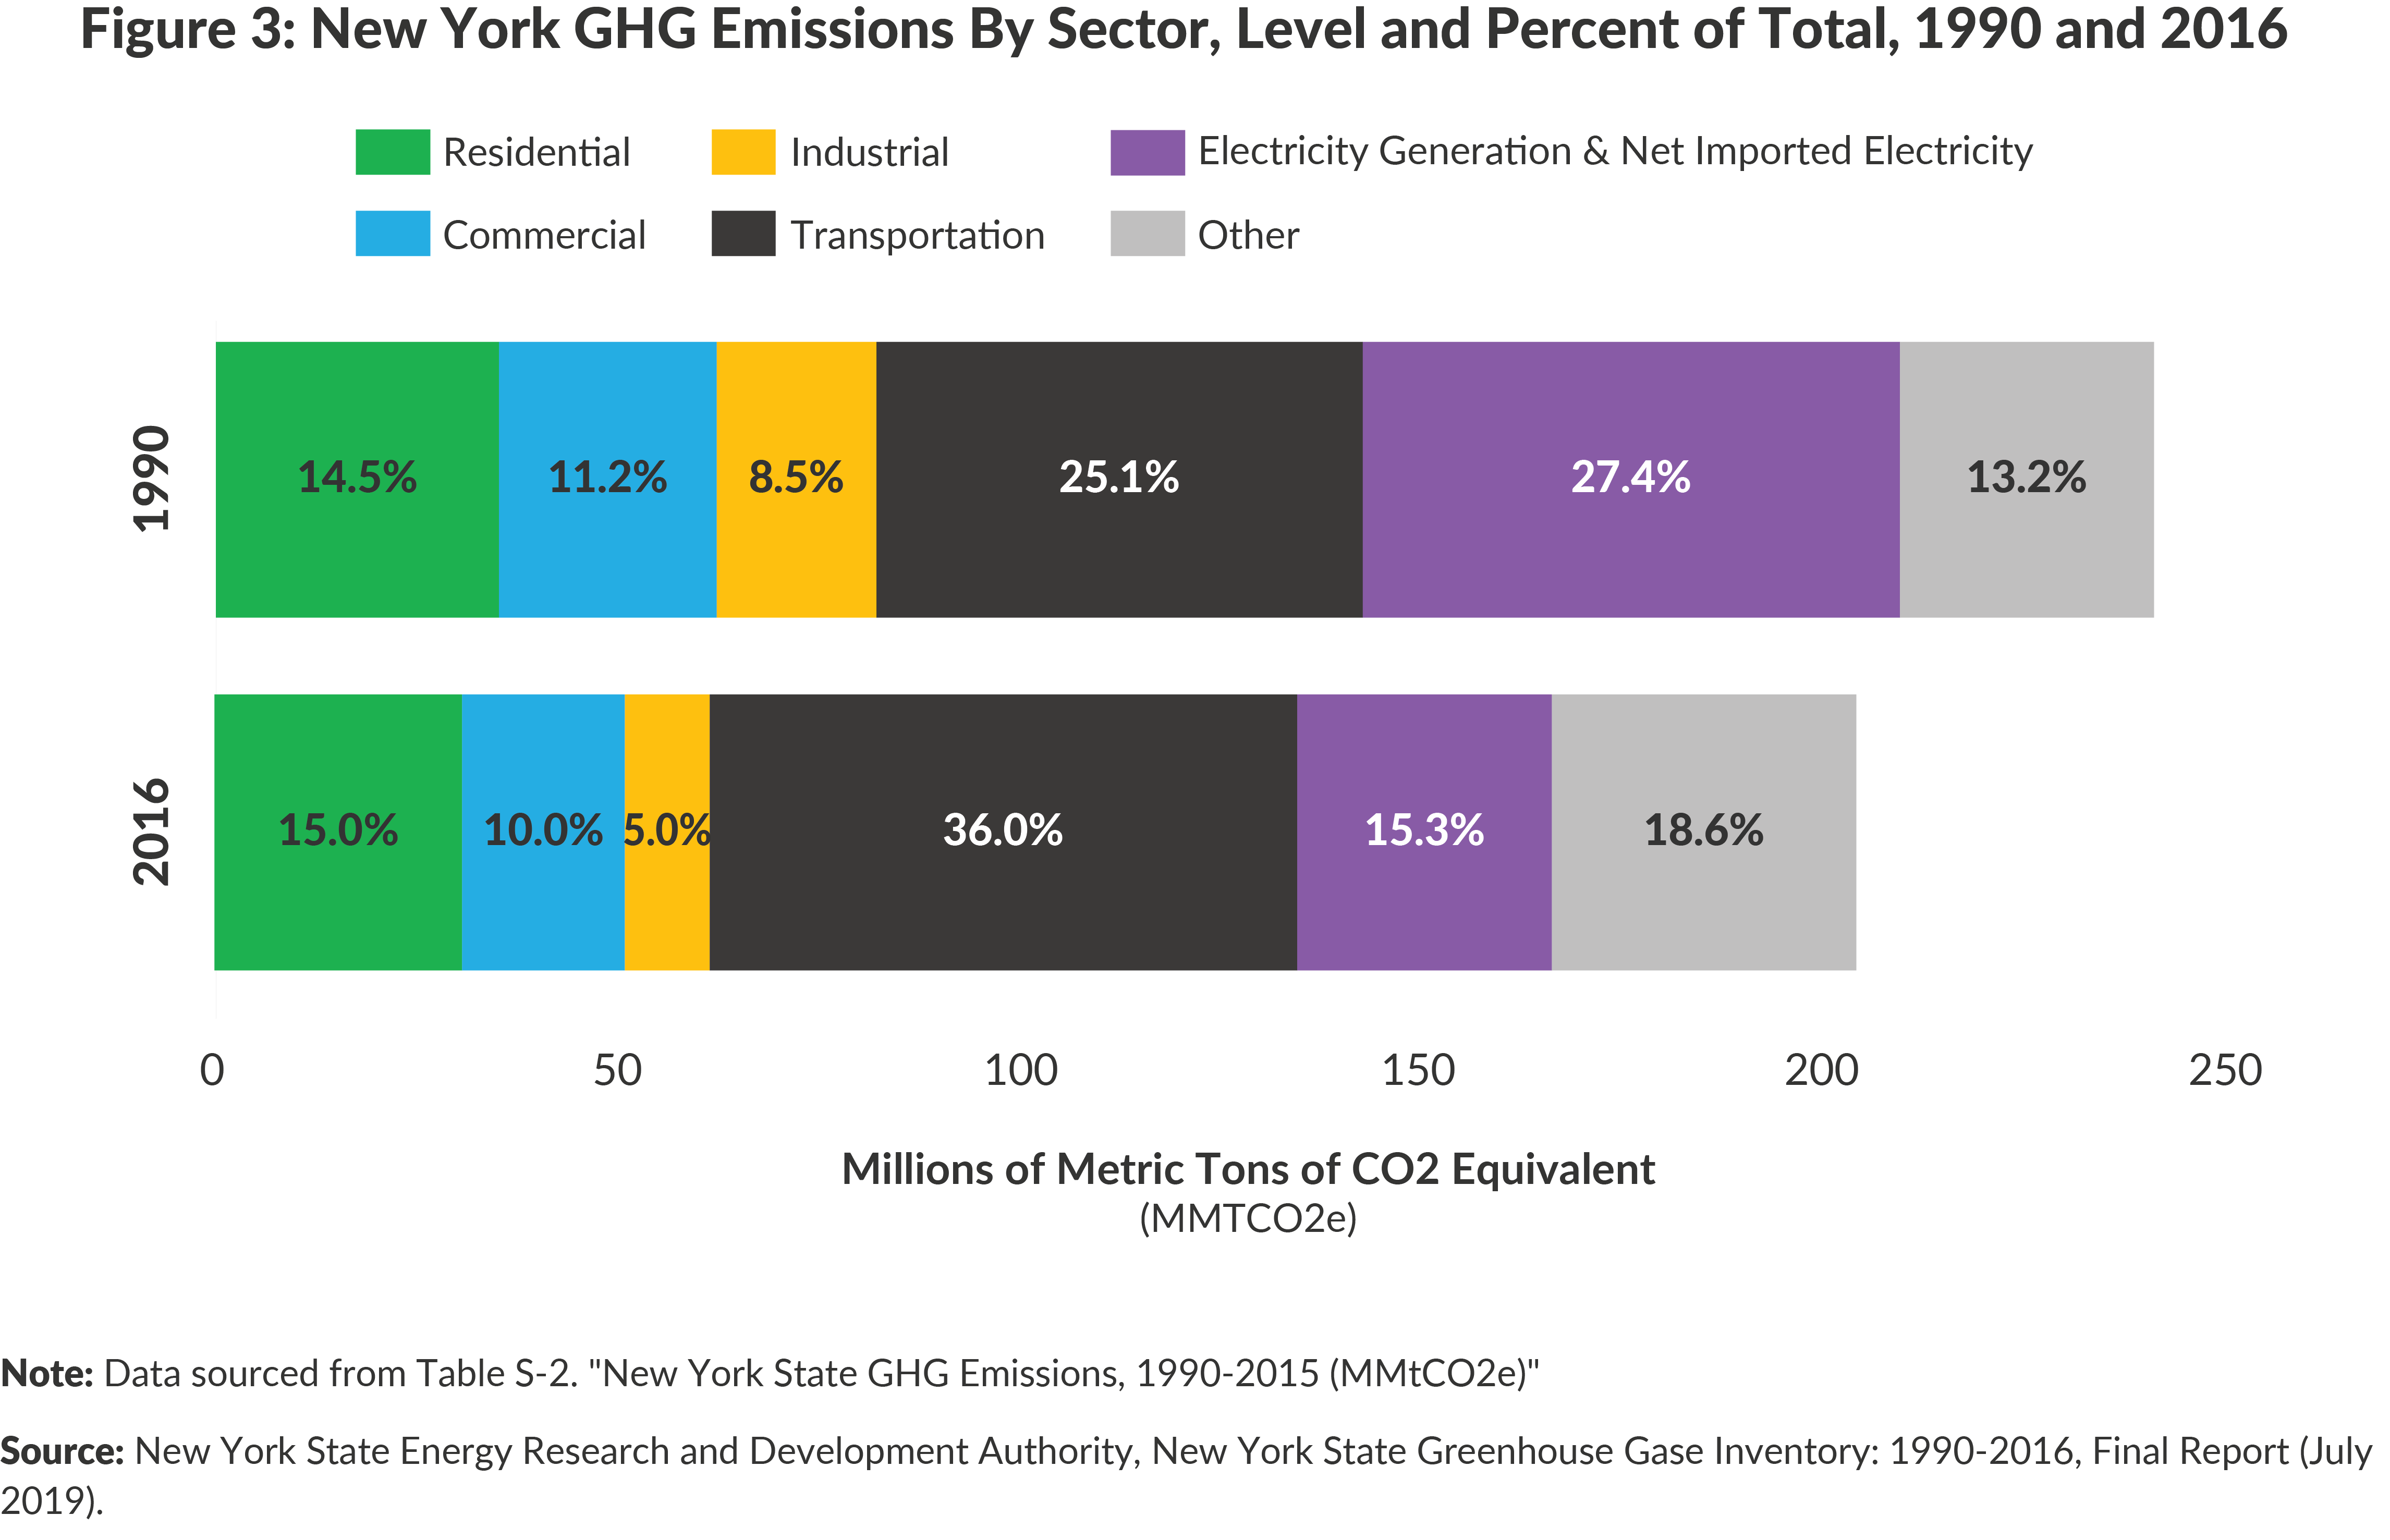 Figure 3: New York GHG Sources, 1990 and 2016